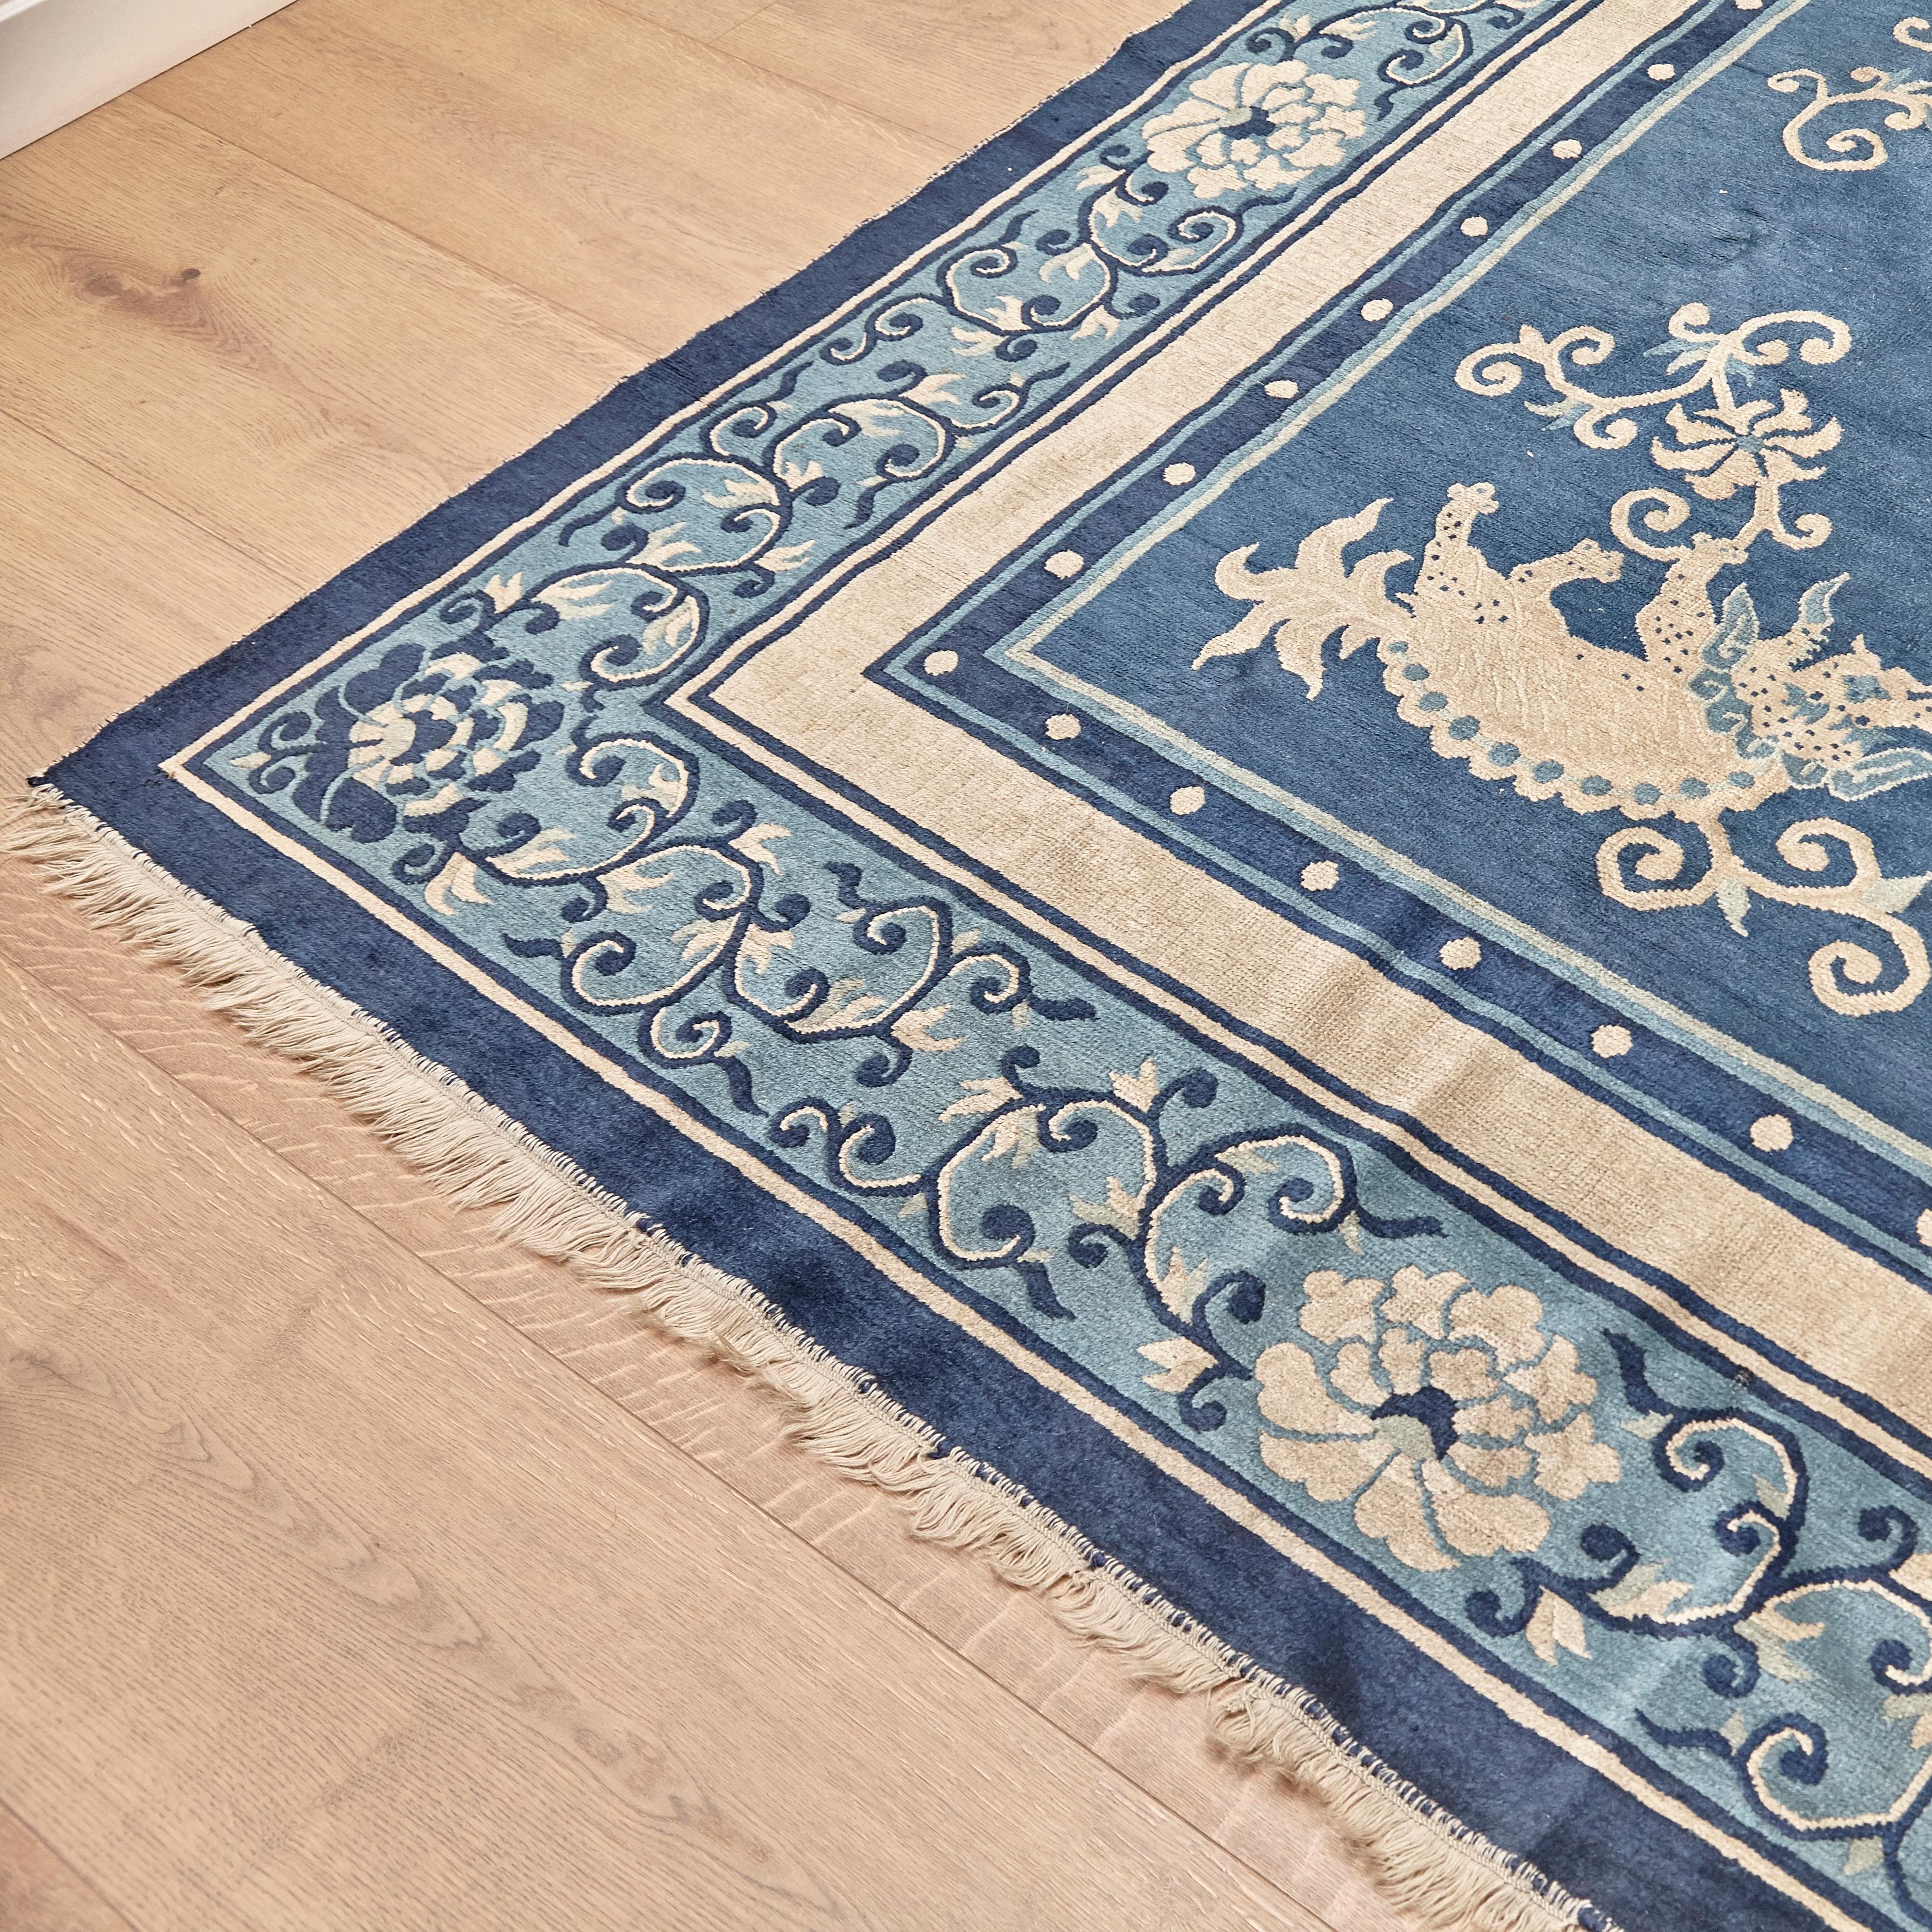 Antique Ningshia from China made in circa 1890 

In original condition and some wear consistent of age and use.

This rug is been restaured as we show on the photos.

Hand knotted wool 

Measures: 382 x 526 cm.